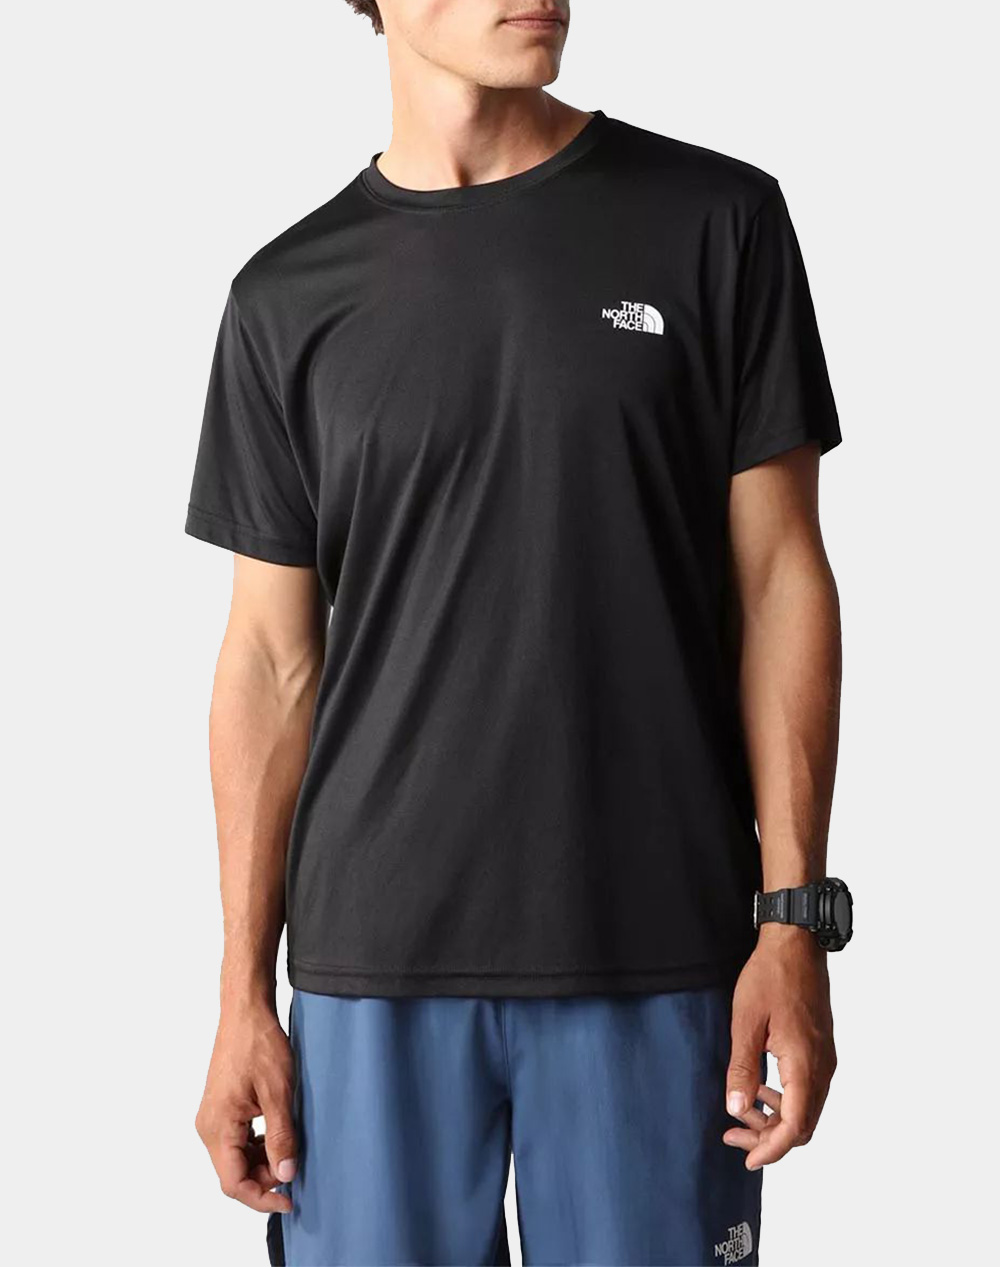 THE NORTH FACE M REAXION AMP CREW NF0A3RX3-NFJK3 Black